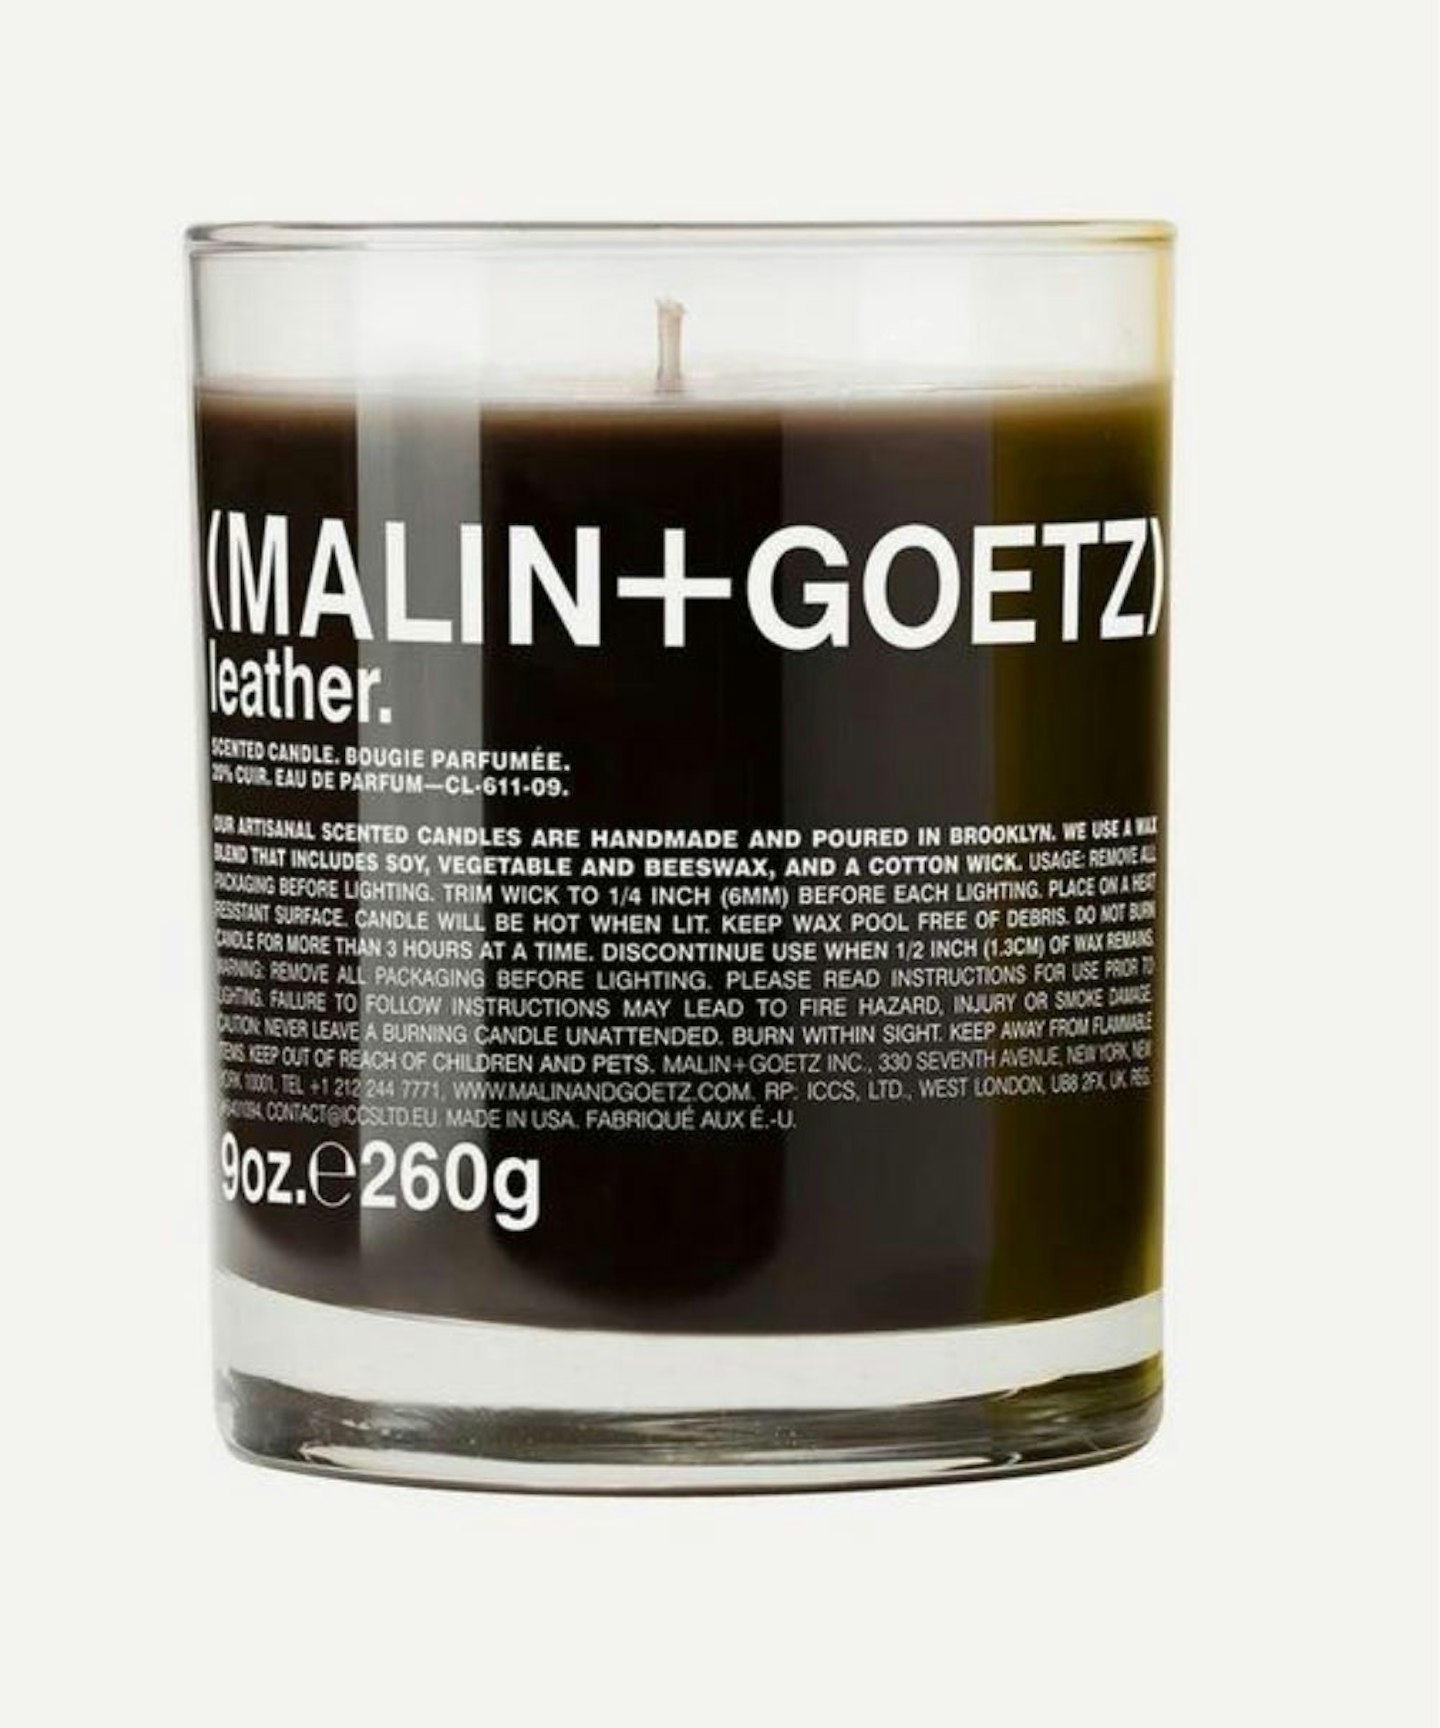 Malin Goetz Leather Scented Candle 